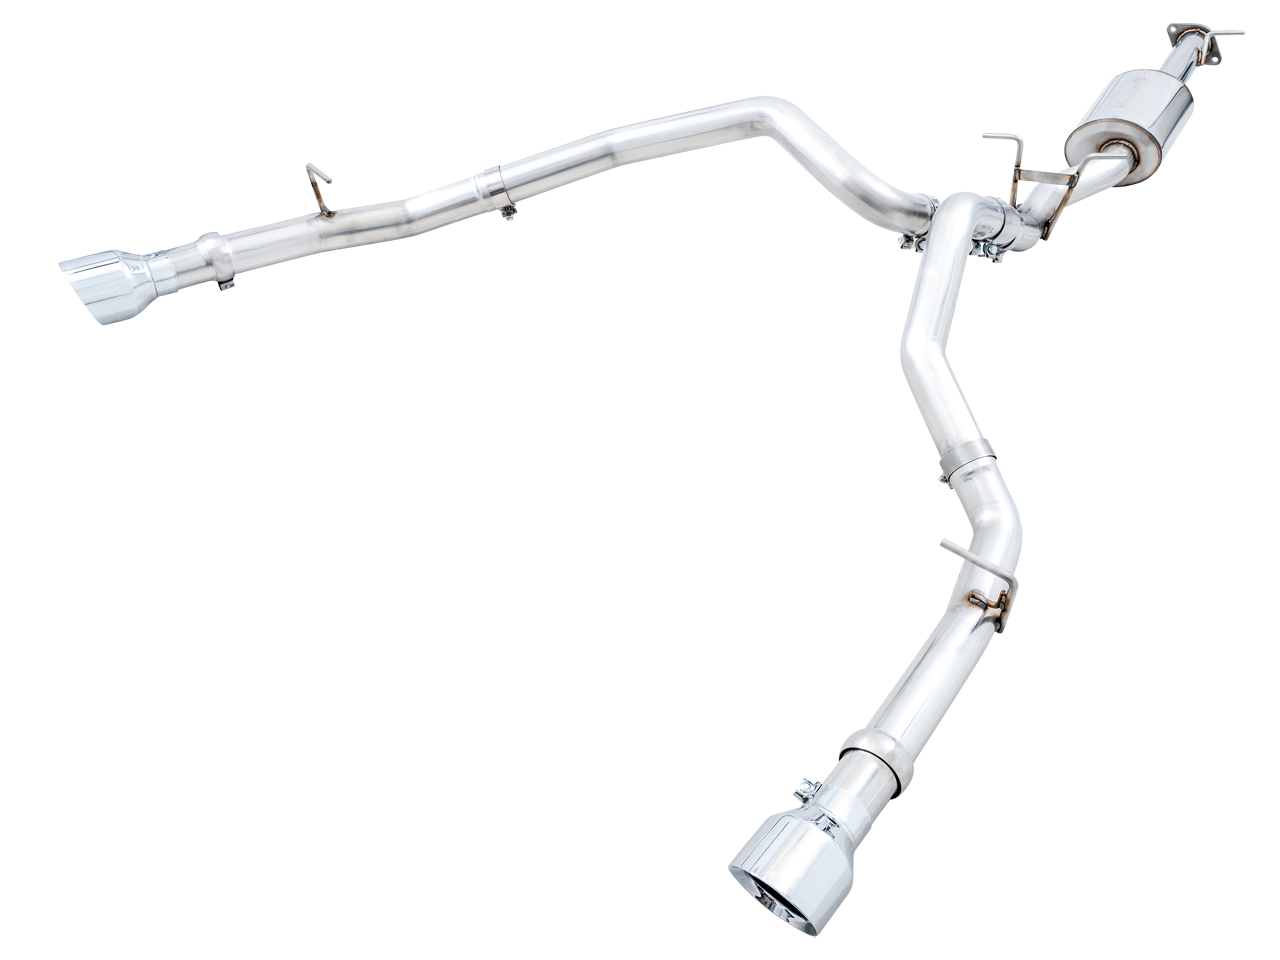 AWE 0FG Dual Rear Exit Catback Exhaust for 5th Gen RAM 1500 5.7L (With Bumper Cutouts) - Chrome Silver Tips